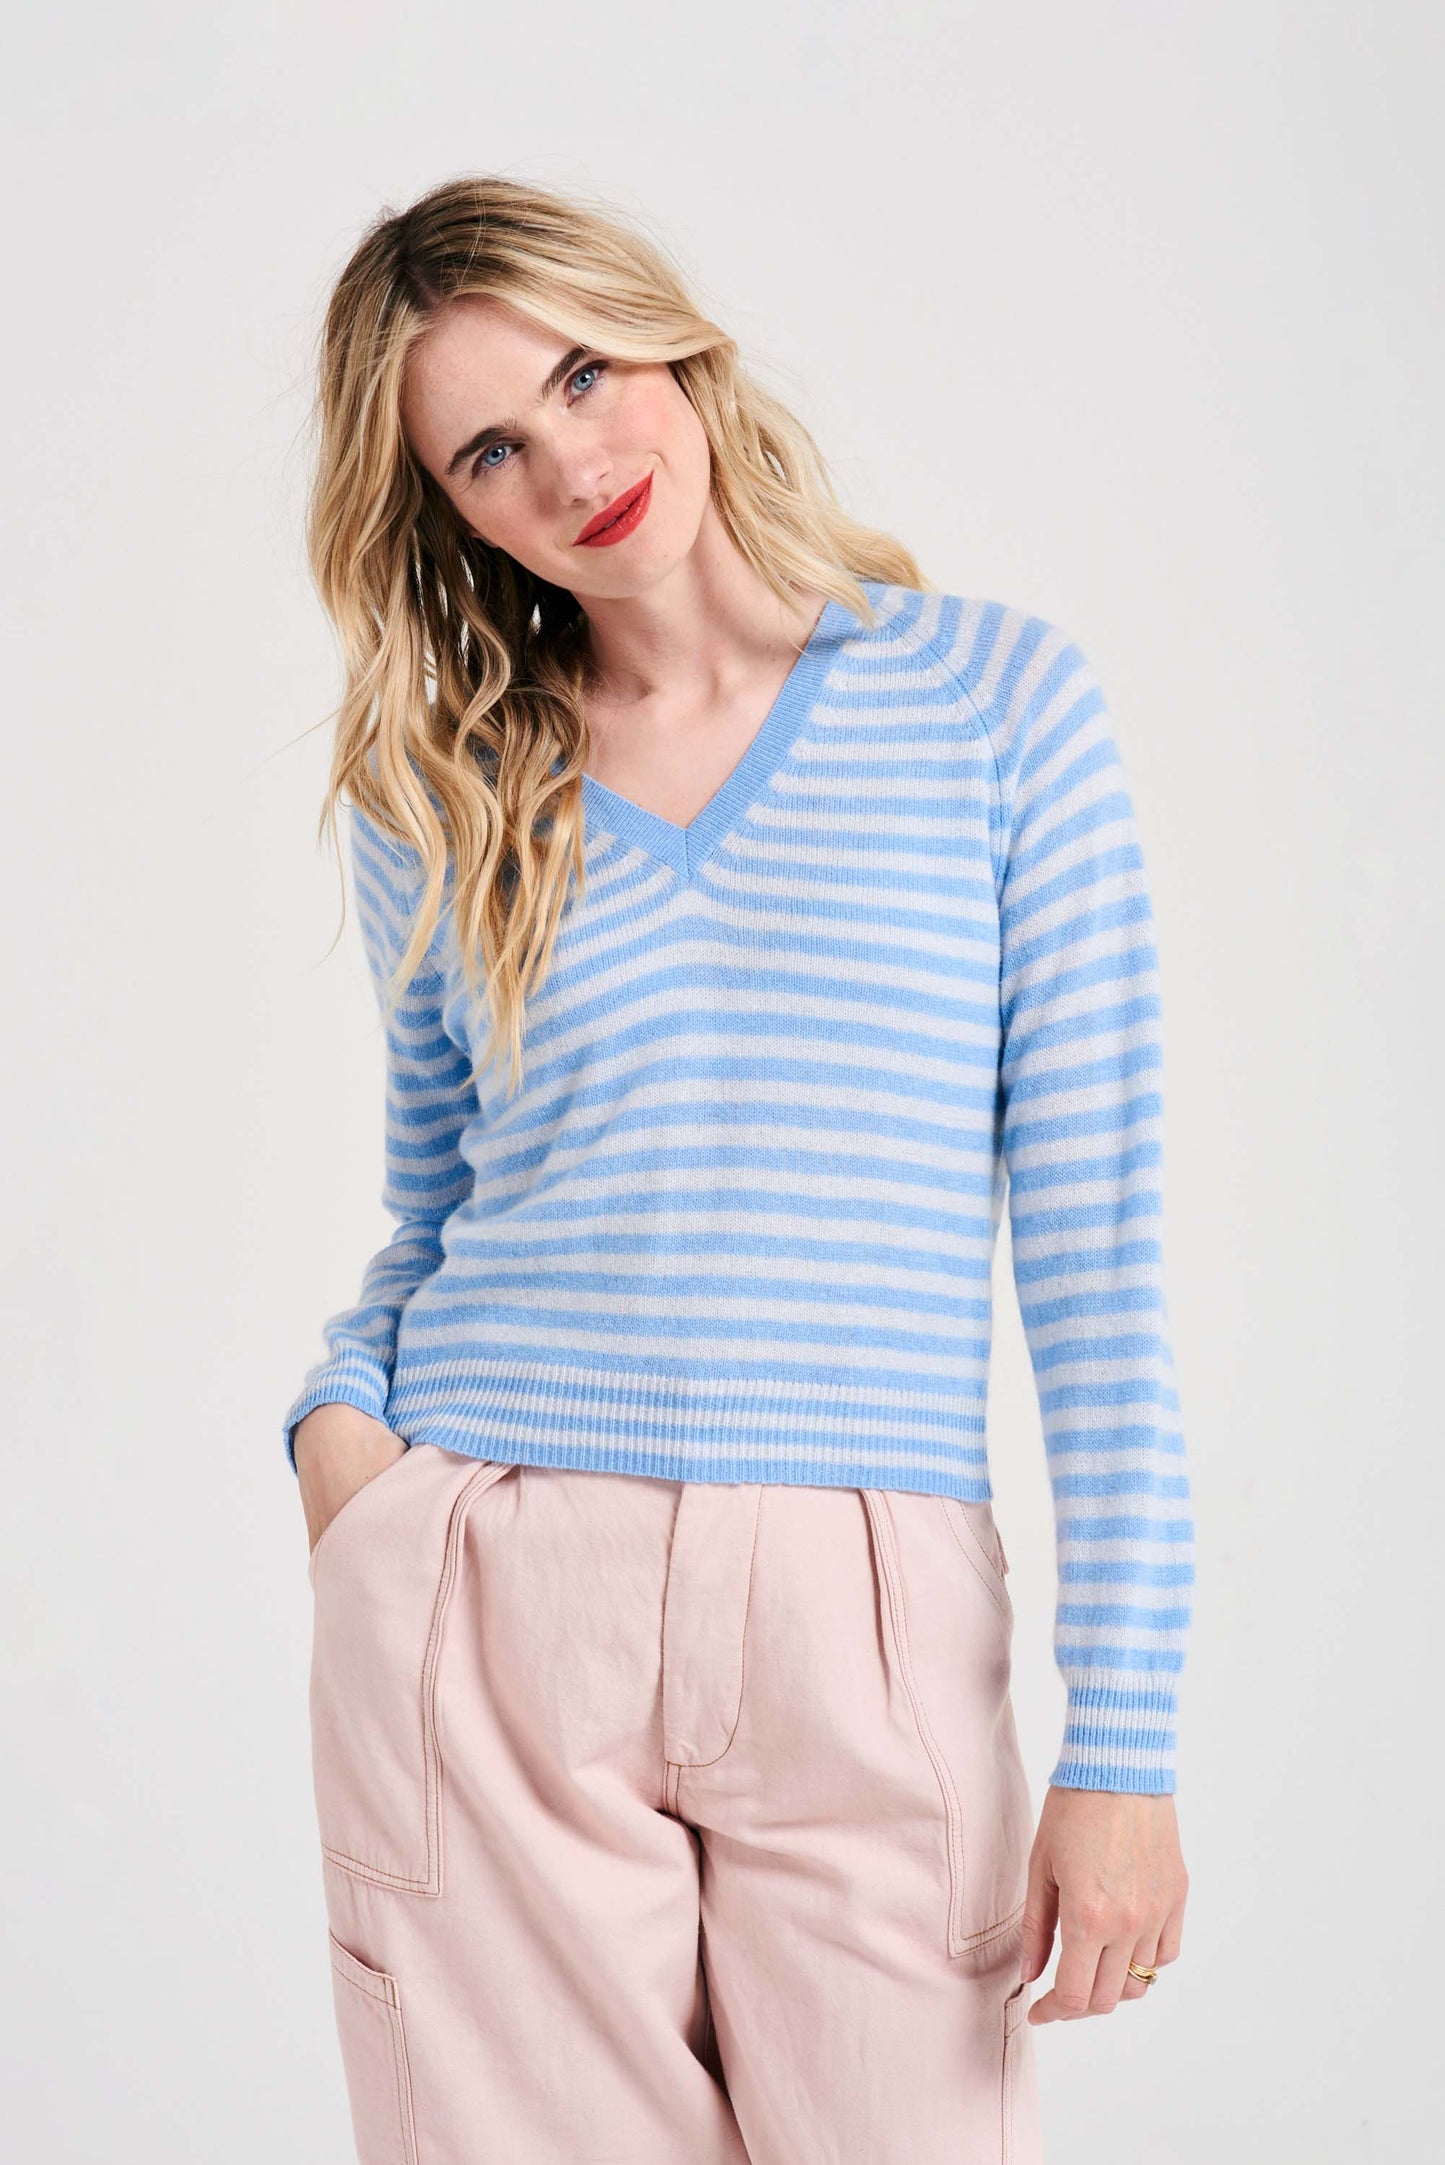 Cashmere Crop Stripe Vee in Wedgewood and Cement by Jumper 1234